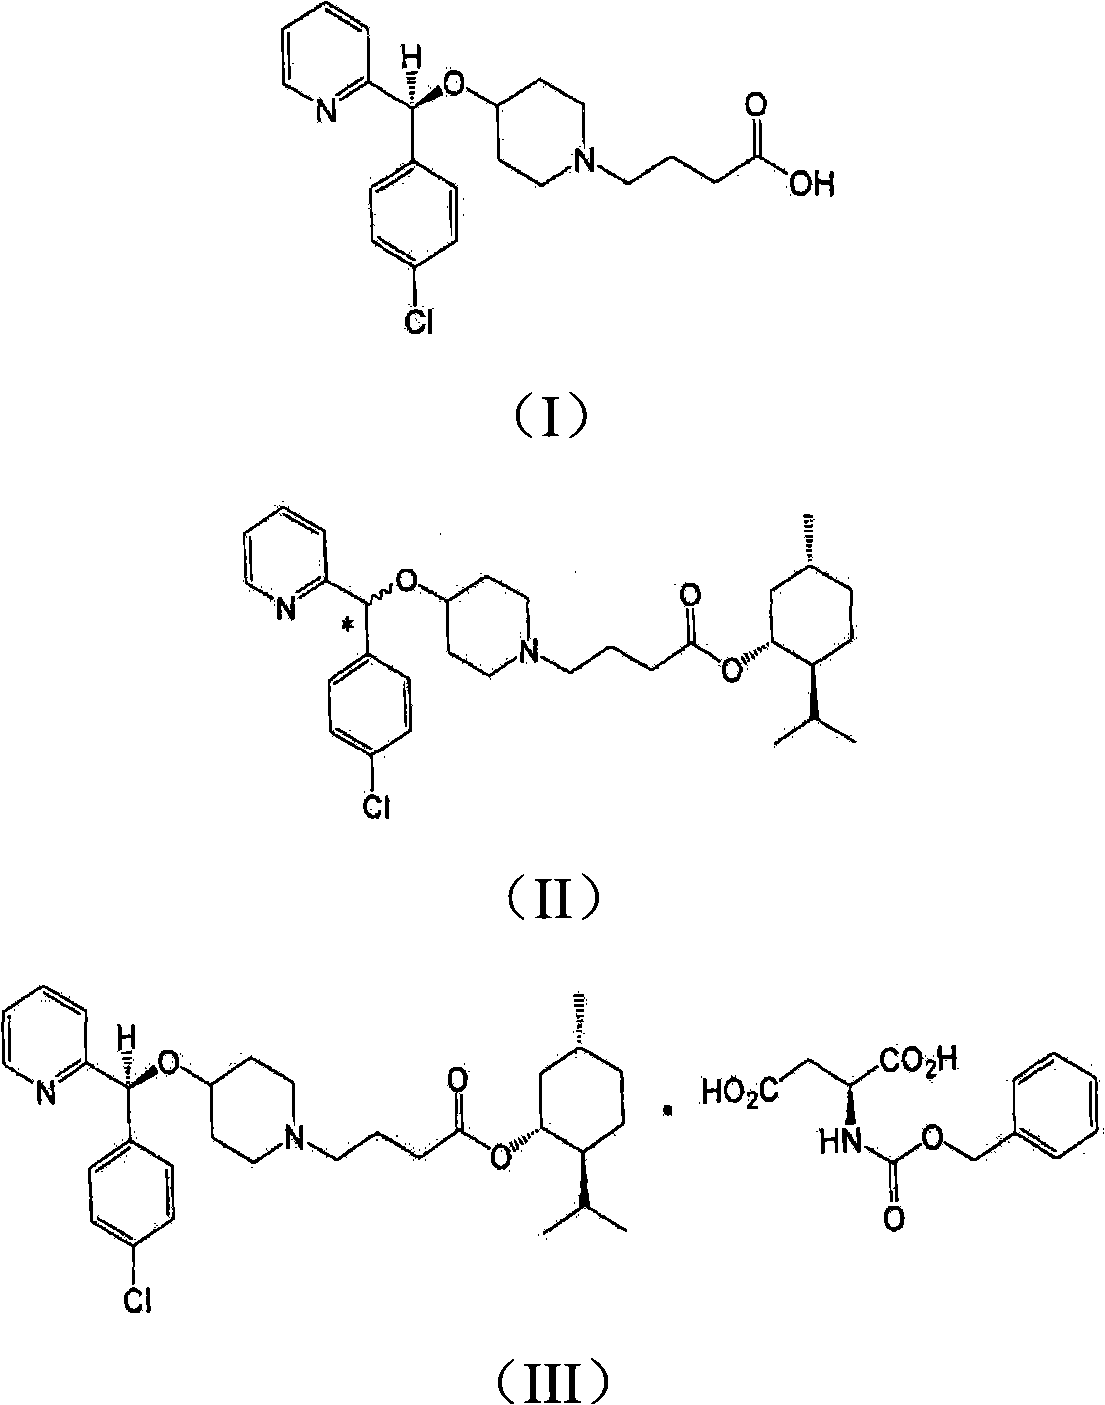 Process for preparing bepotastine and intermediates used therein